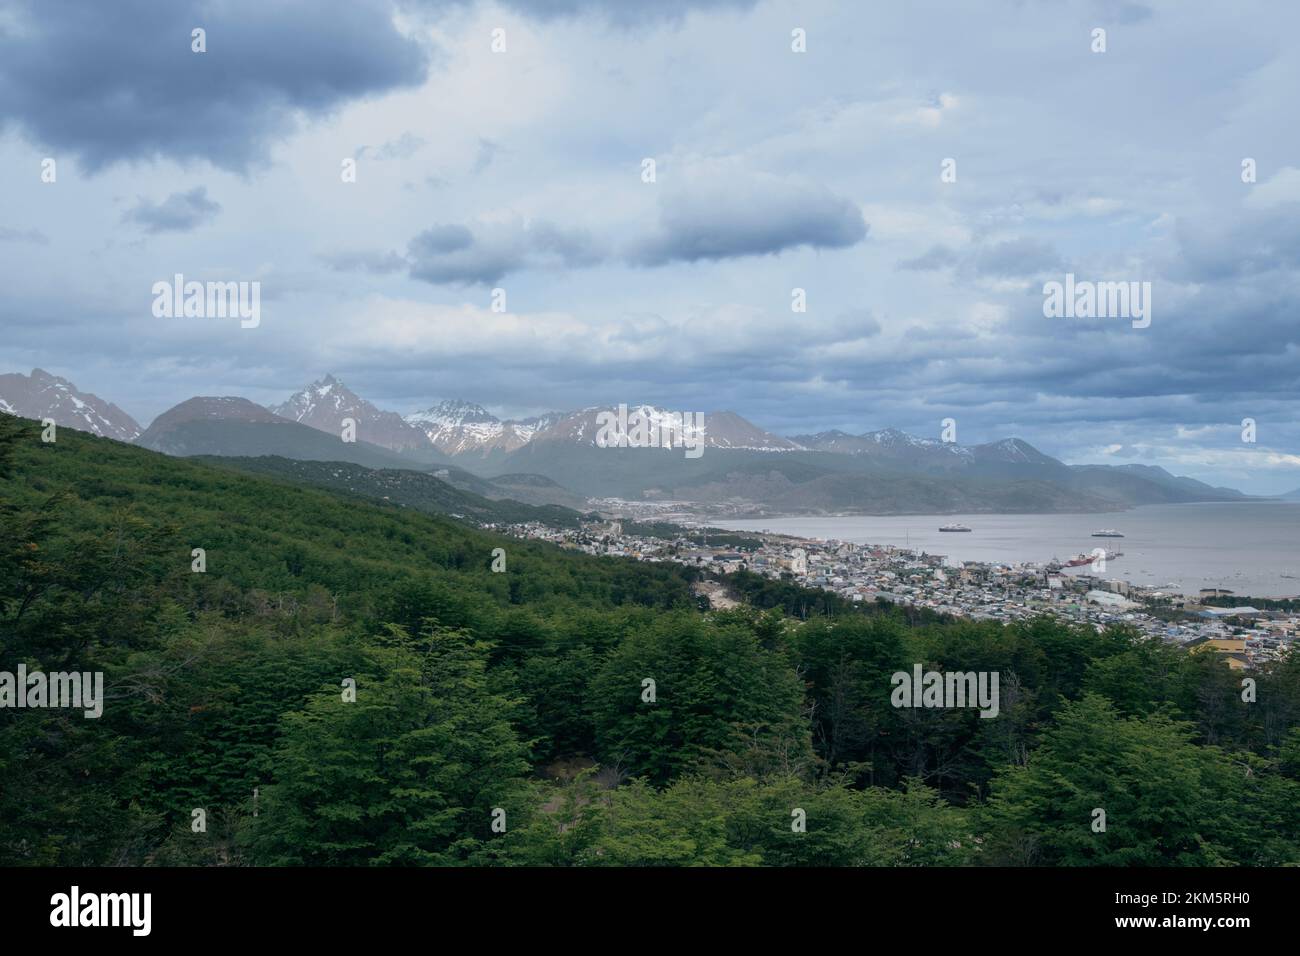 View of the Mountains surrounding the city of Ushuaia that flows into the harbor. Stock Photo